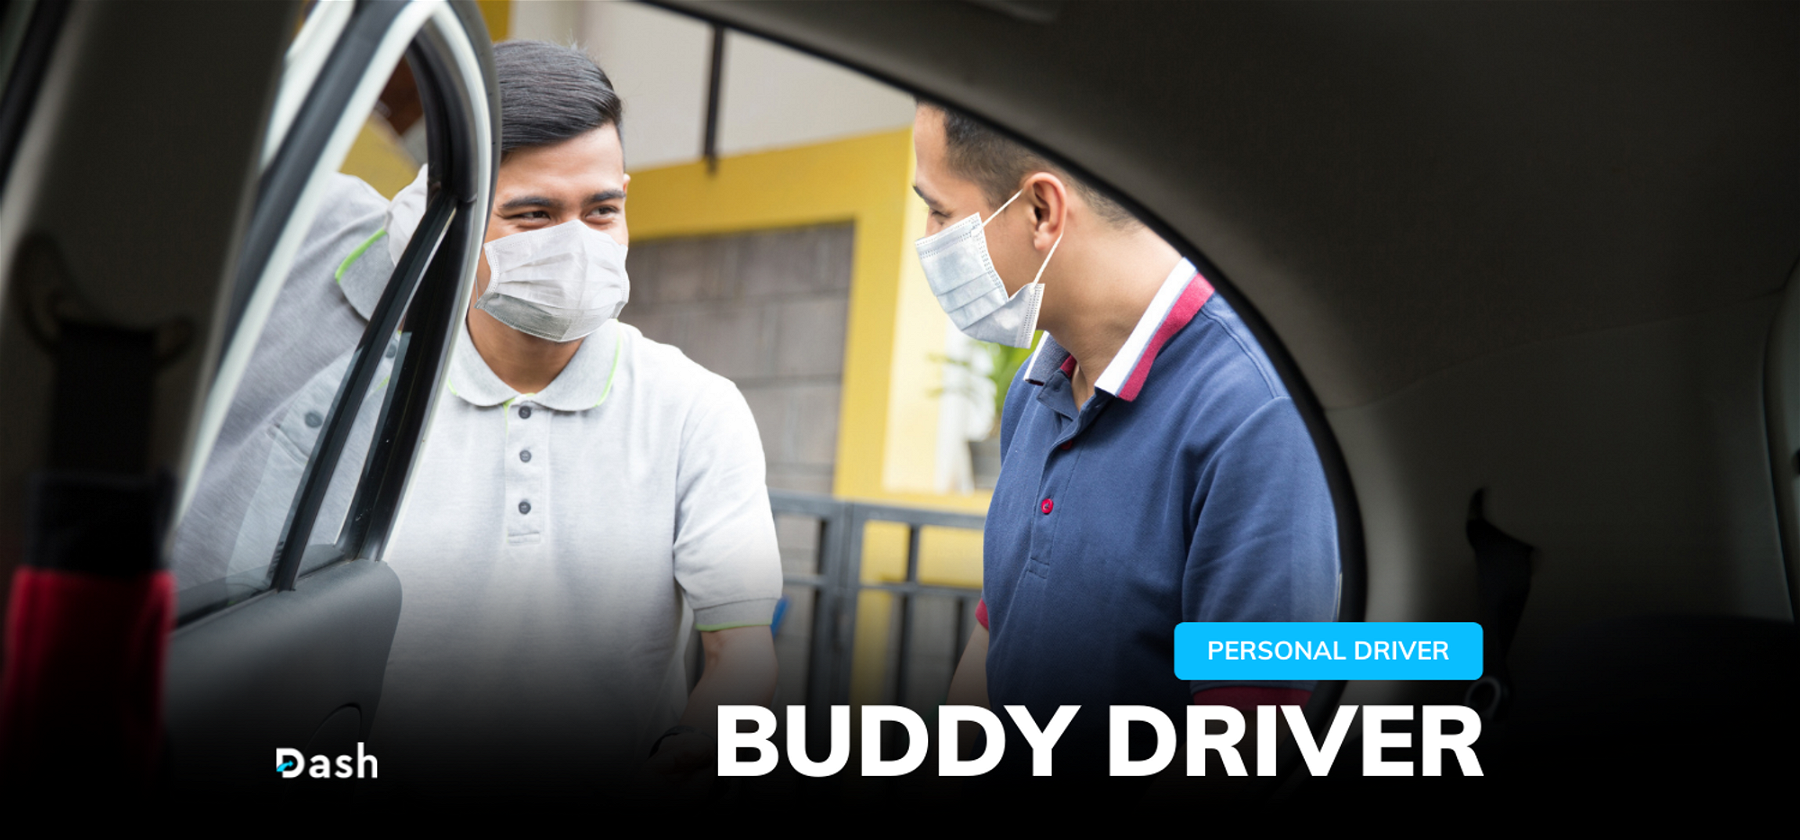 Buddy Driver - Be Their Trusted Personal Driver By Driving Their Car